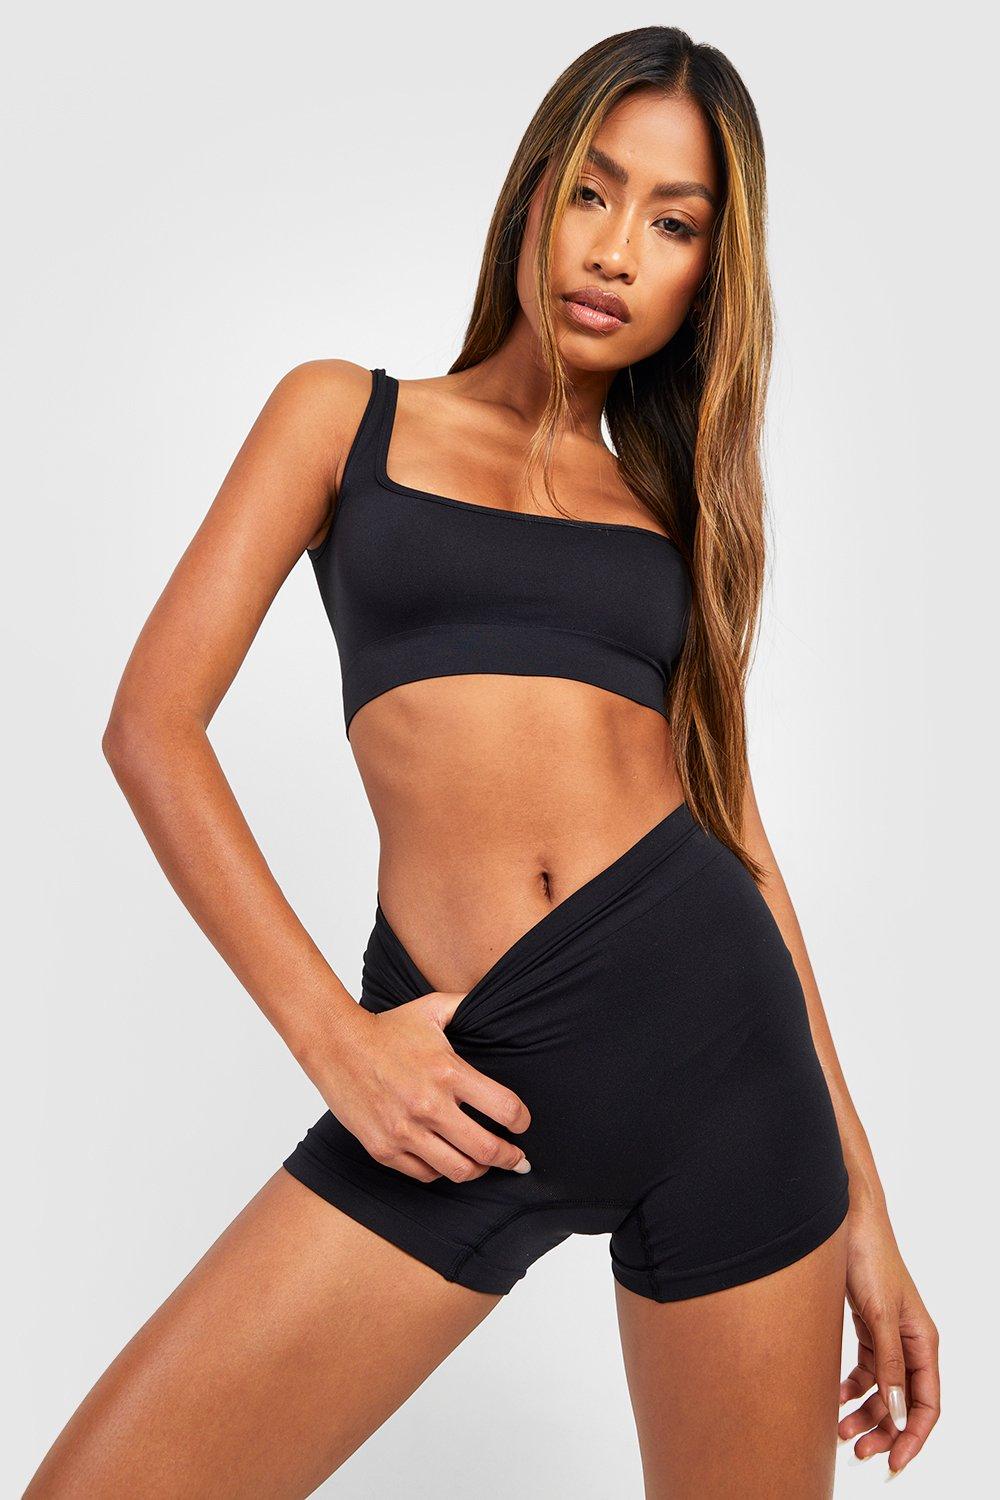 Boohoo - Women's Bralette - 67 products